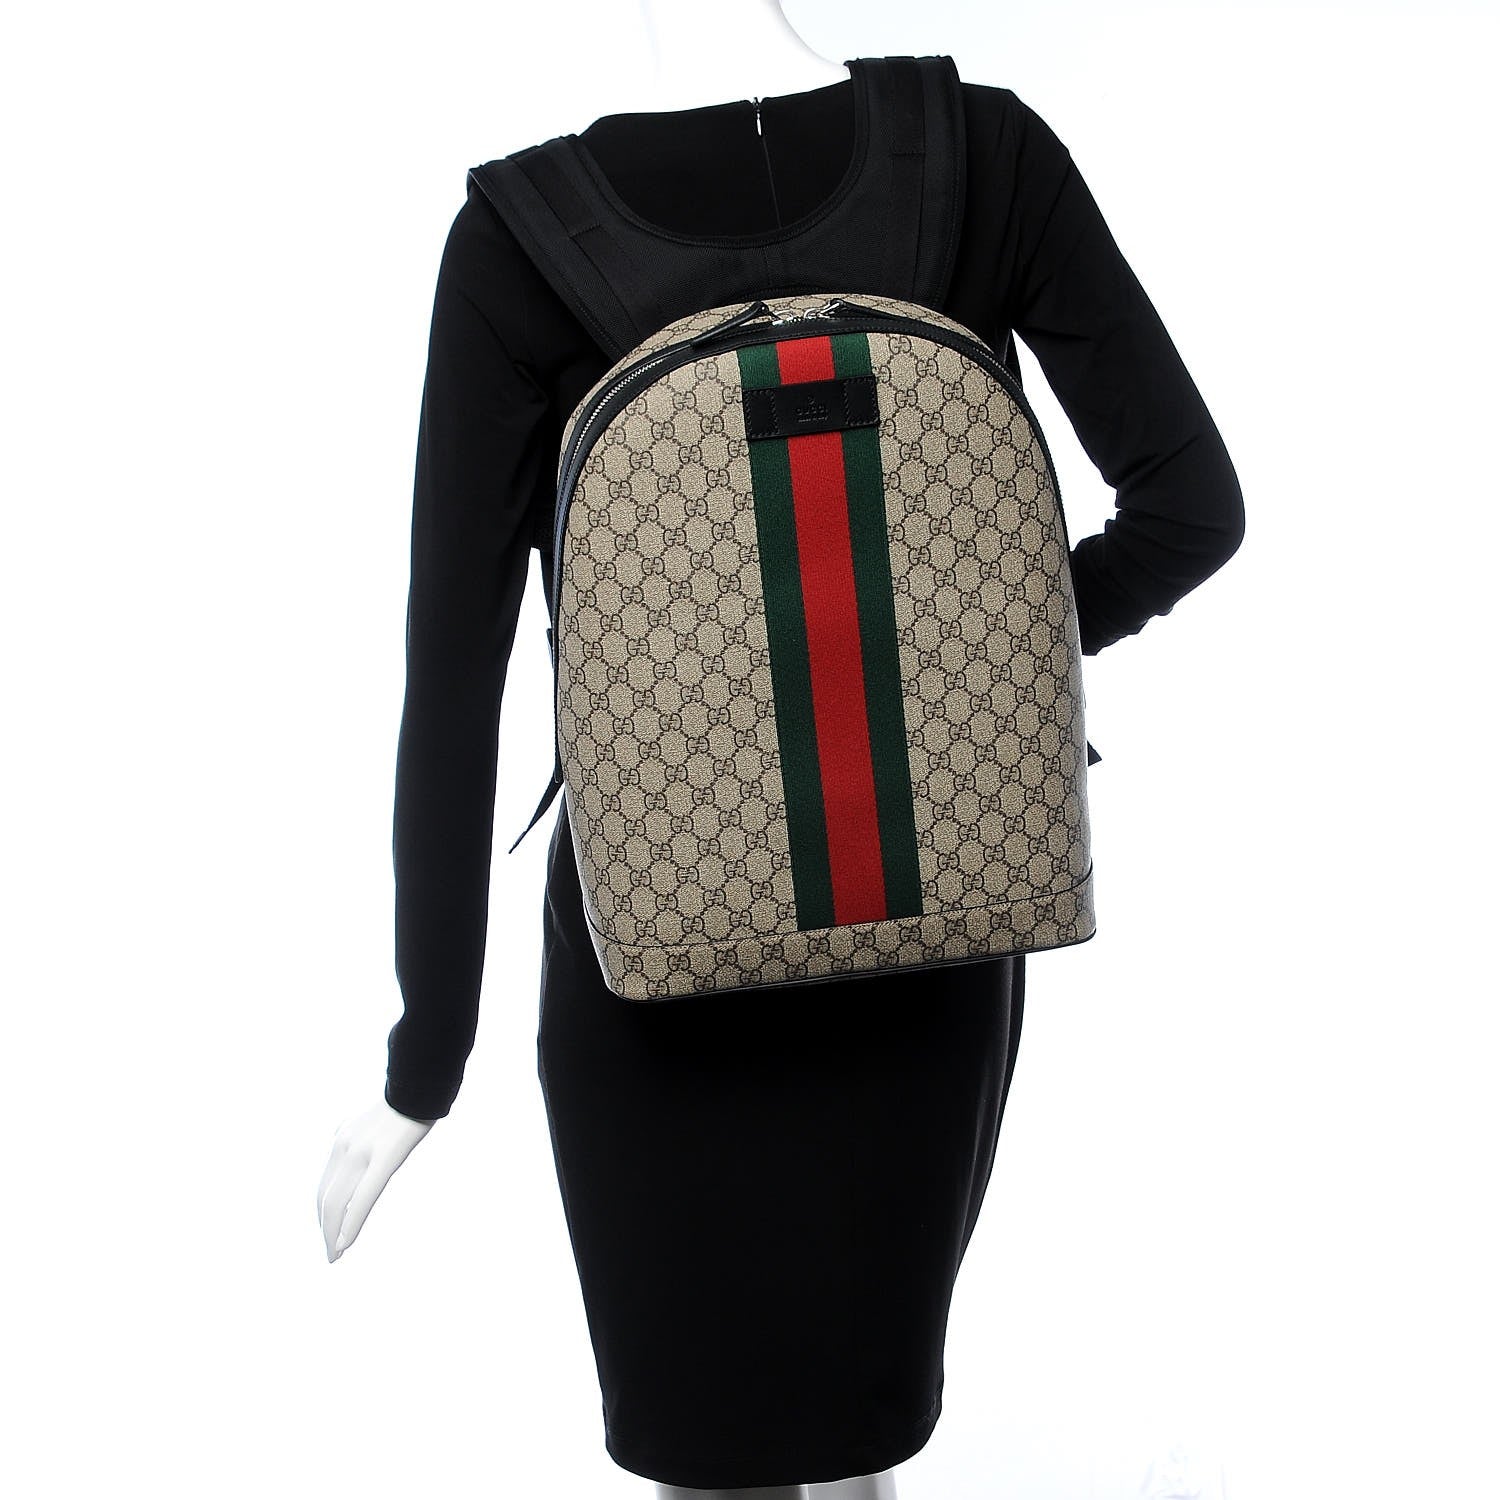 Gucci GG Supreme Backpack with Web Stripe 442722 at_Queen_Bee_of_Beverly_Hills